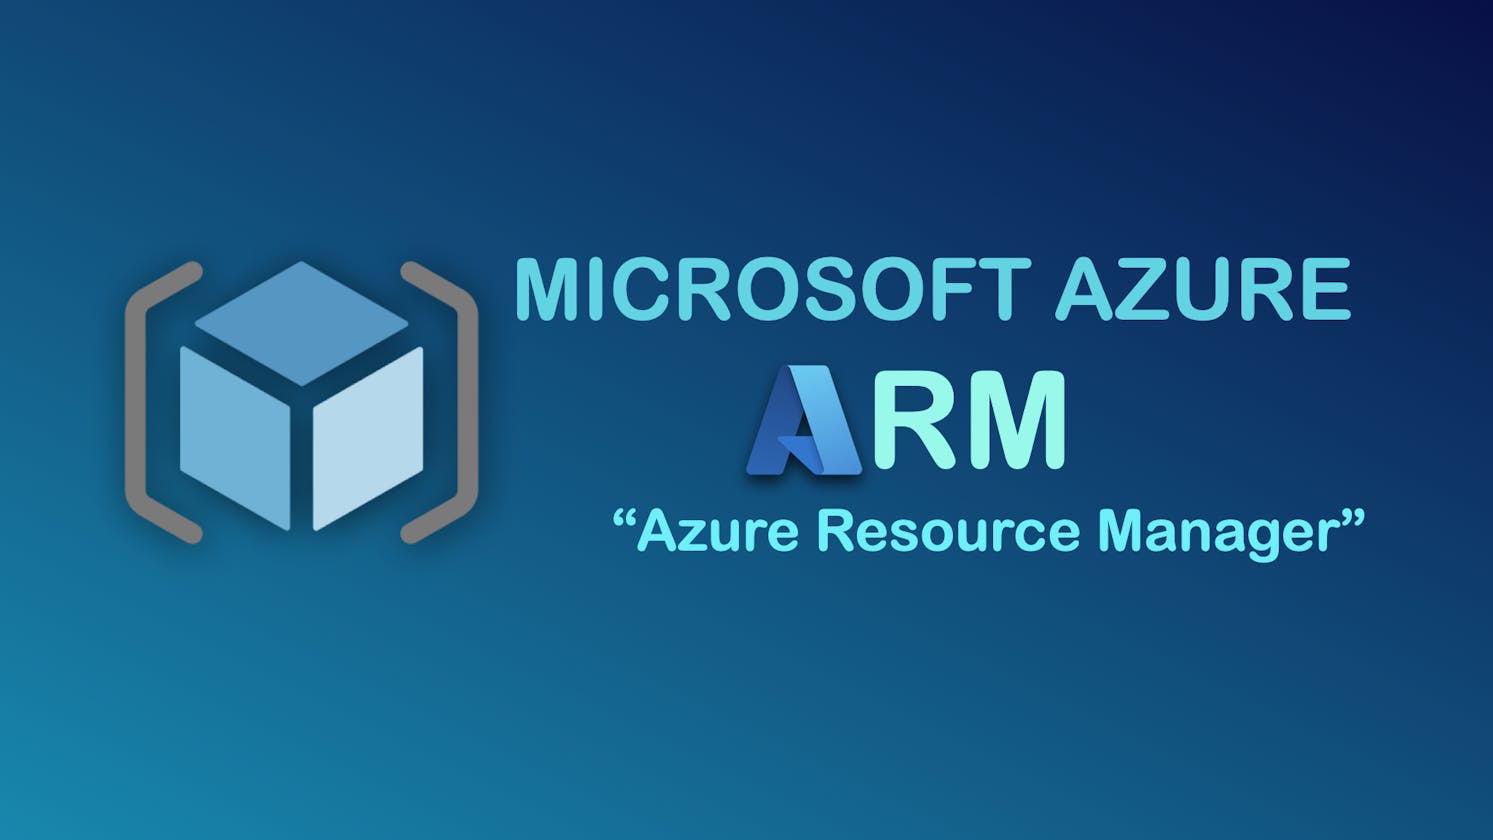 [MS Azure] ARM - Azure Resource Manager